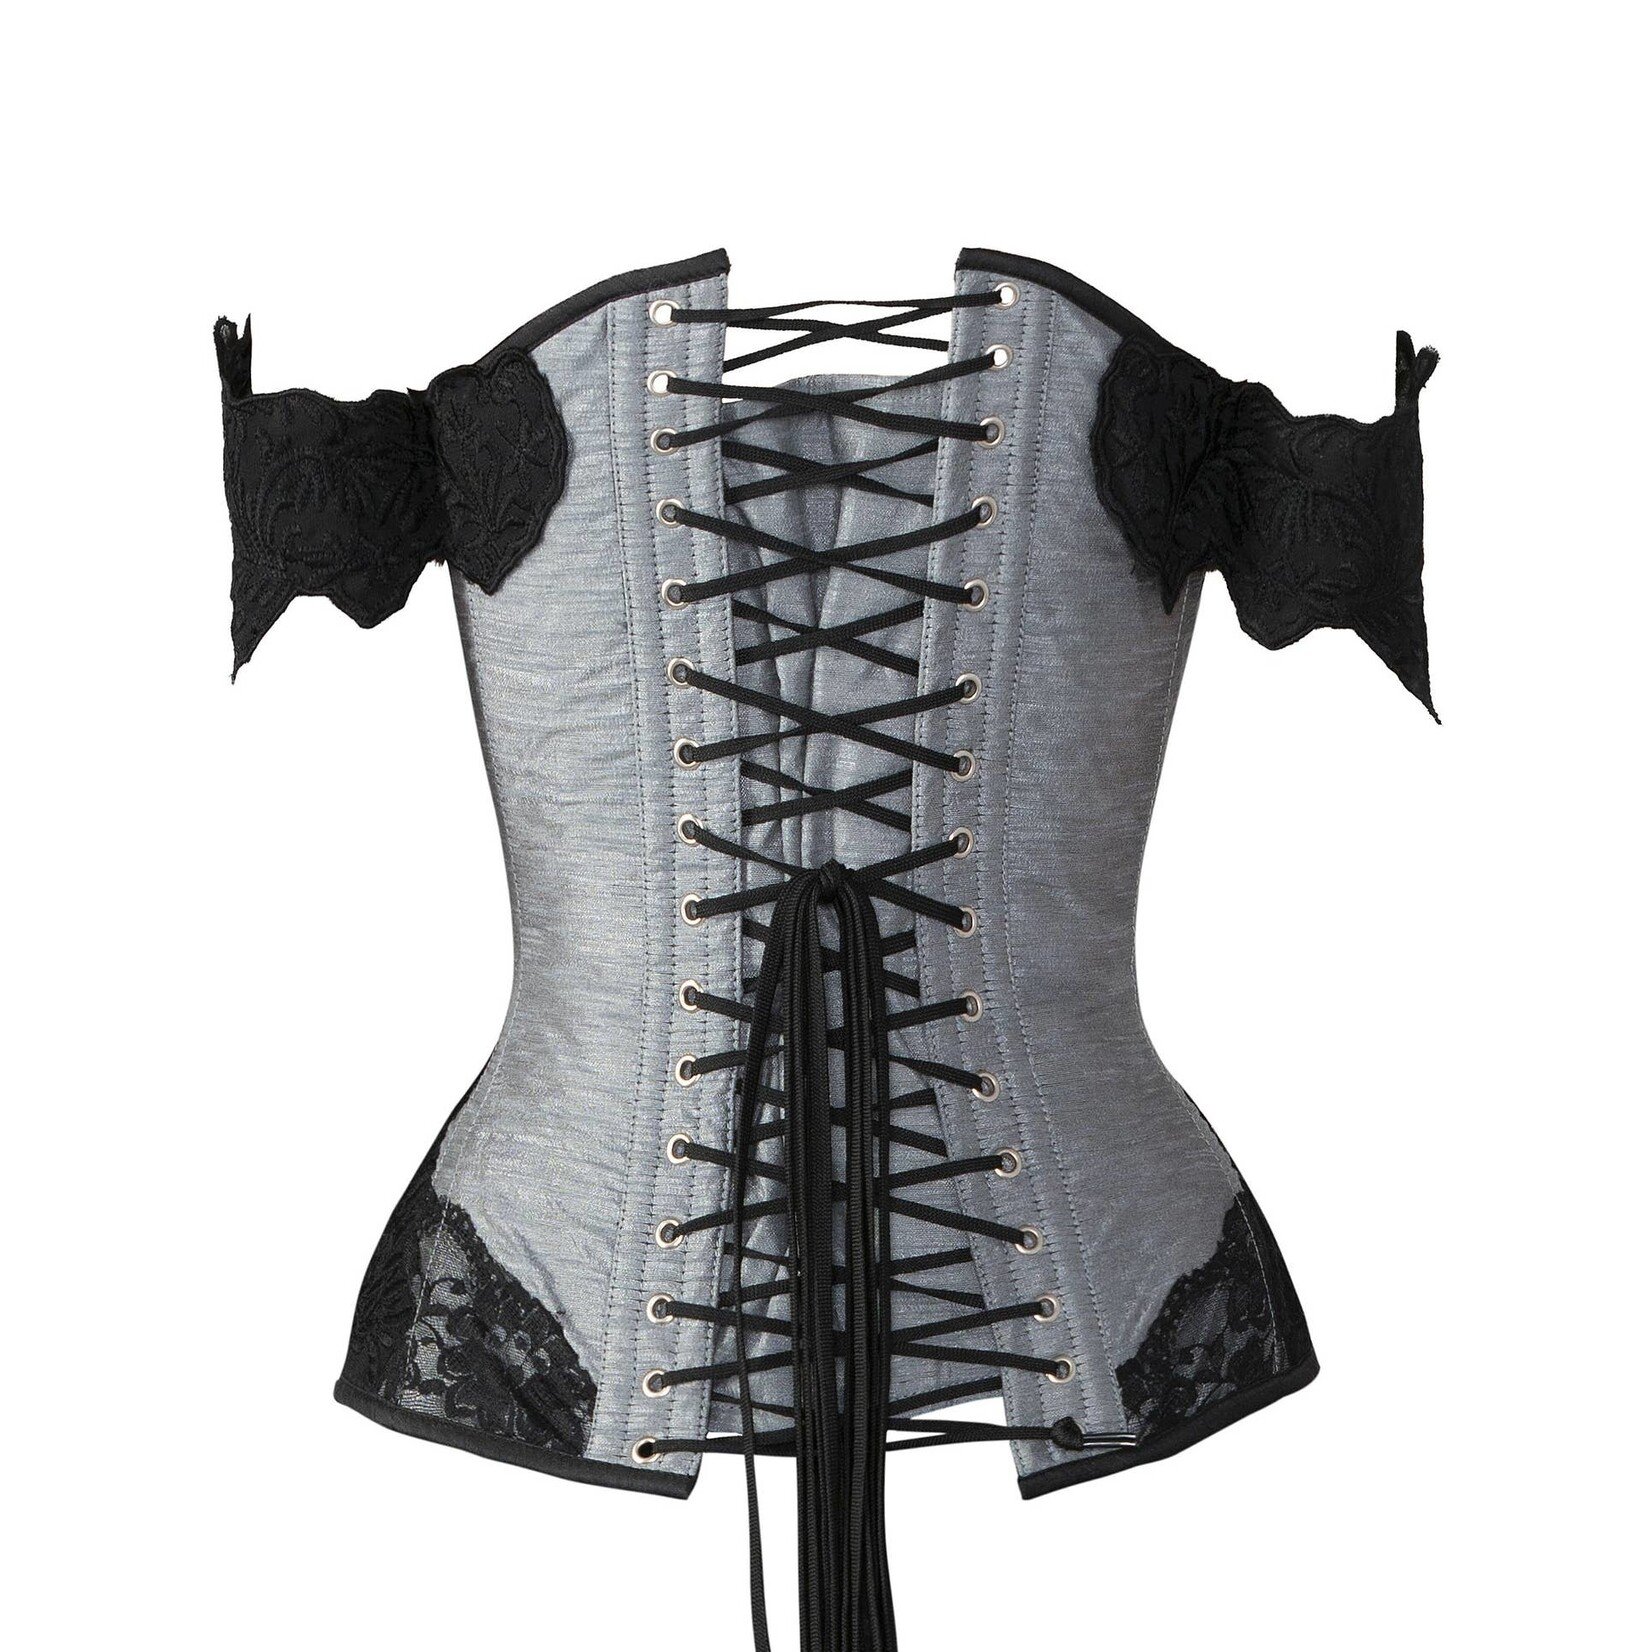 Corset Story Corset Story- Longline Corset with Cap Sleeve- GRY- SIZE 34IN/ 37-38IN